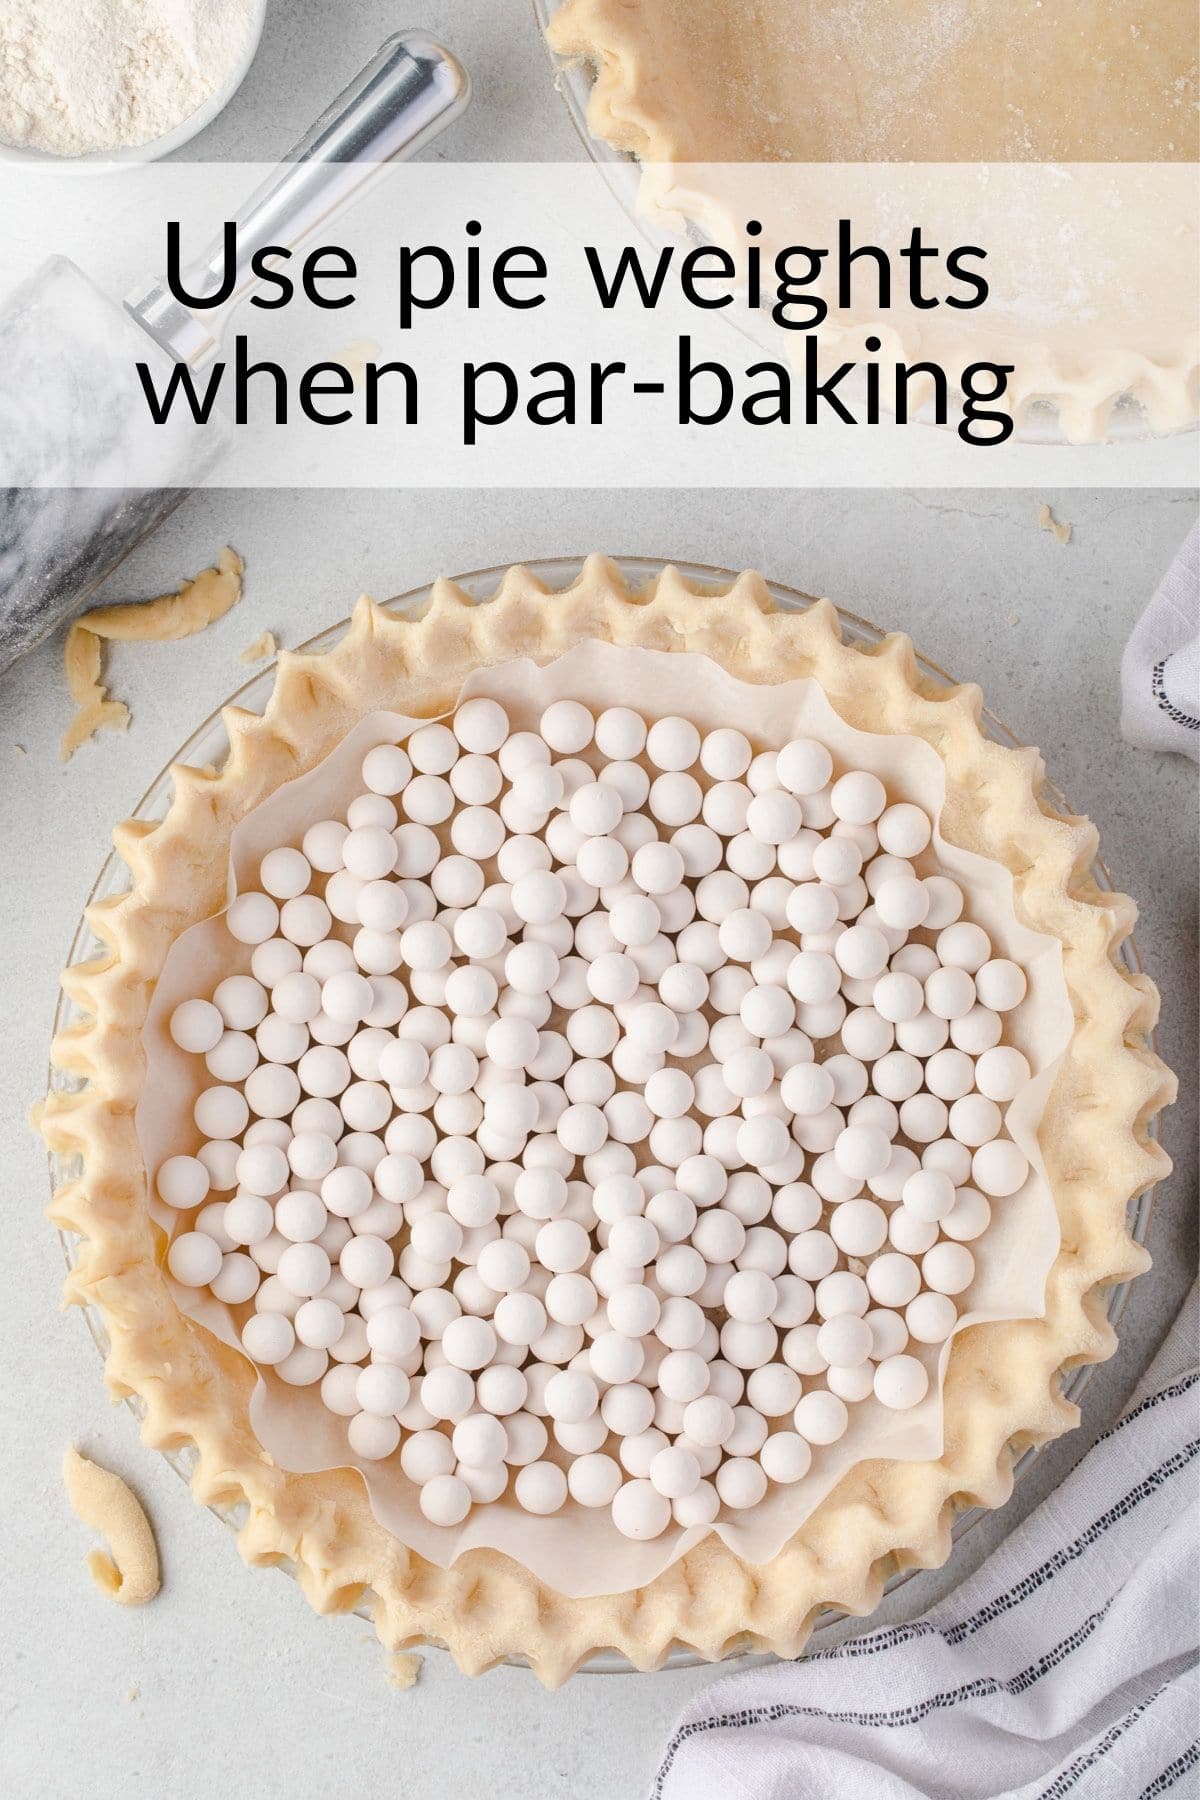 Pie crust in plate with crimped edges, parchment lining dough and pan filled with pie weights.